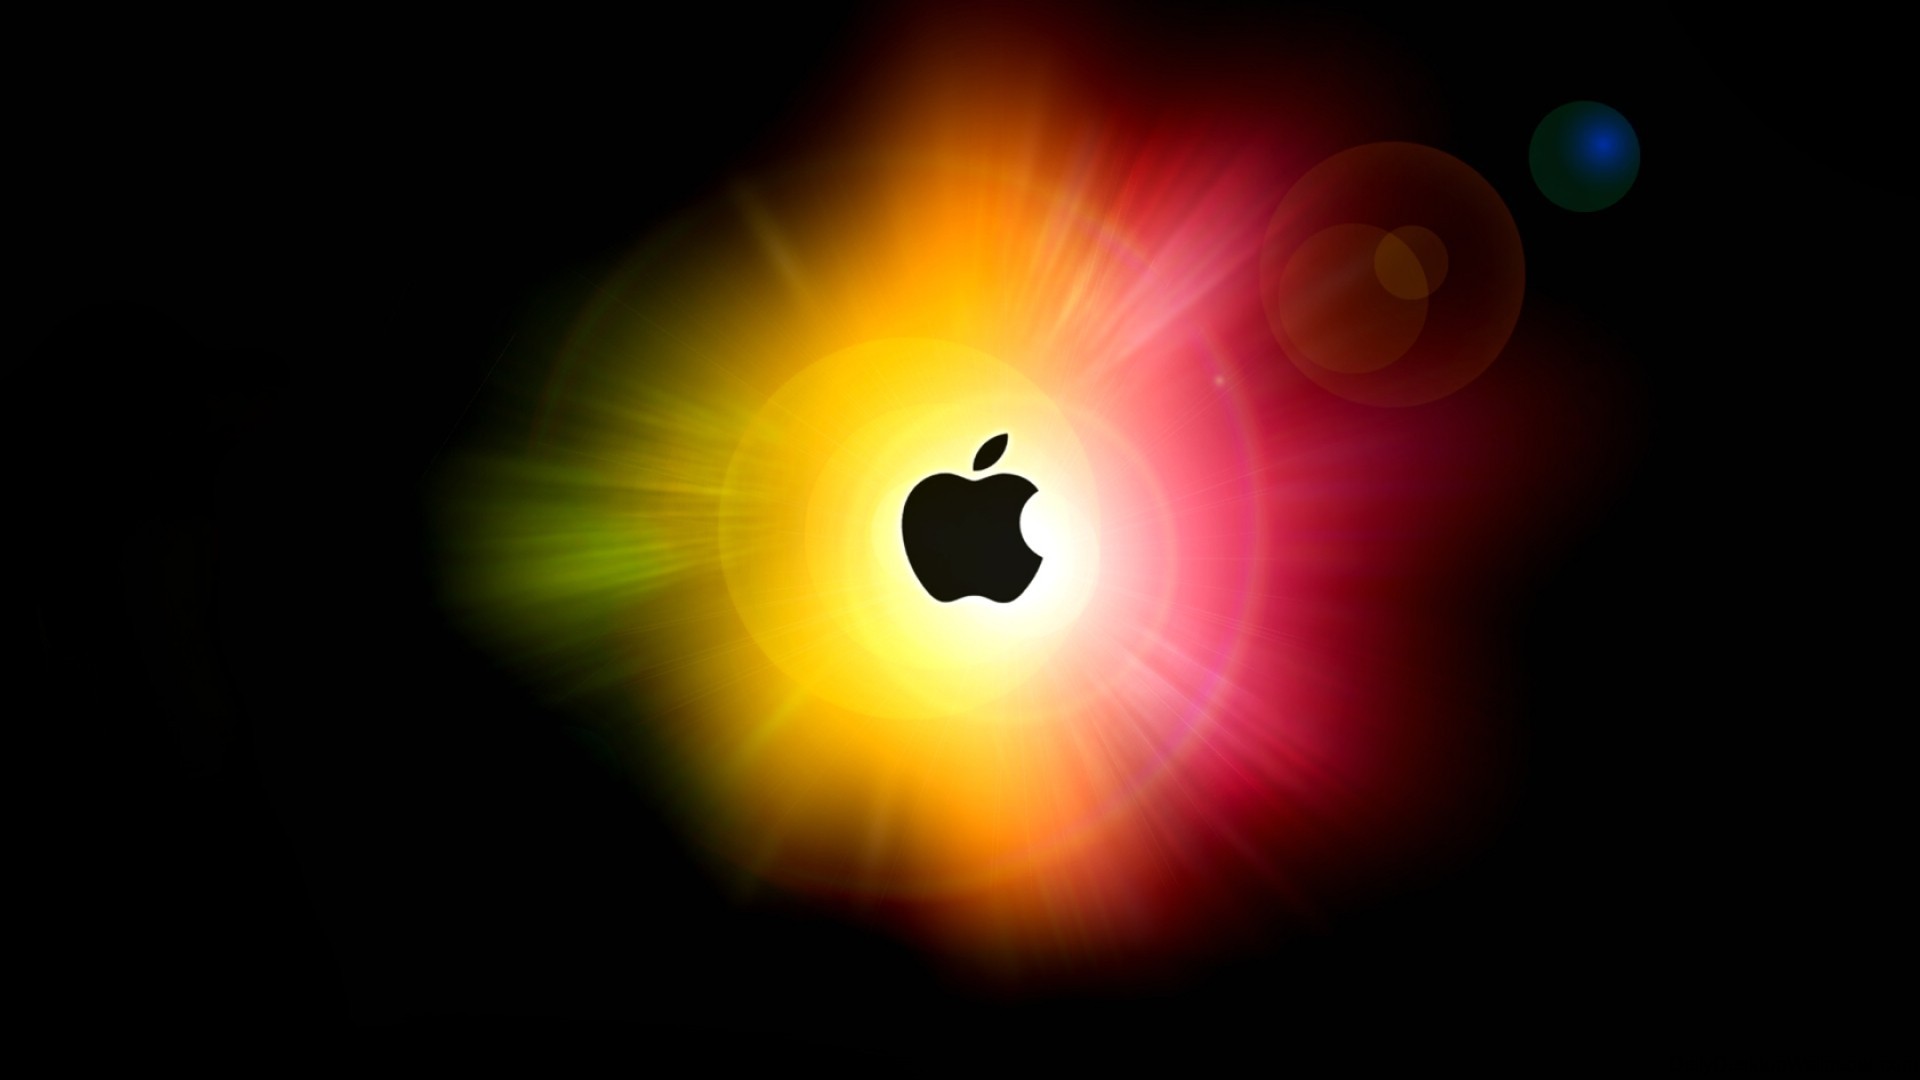 OS X Flare Wallpaper